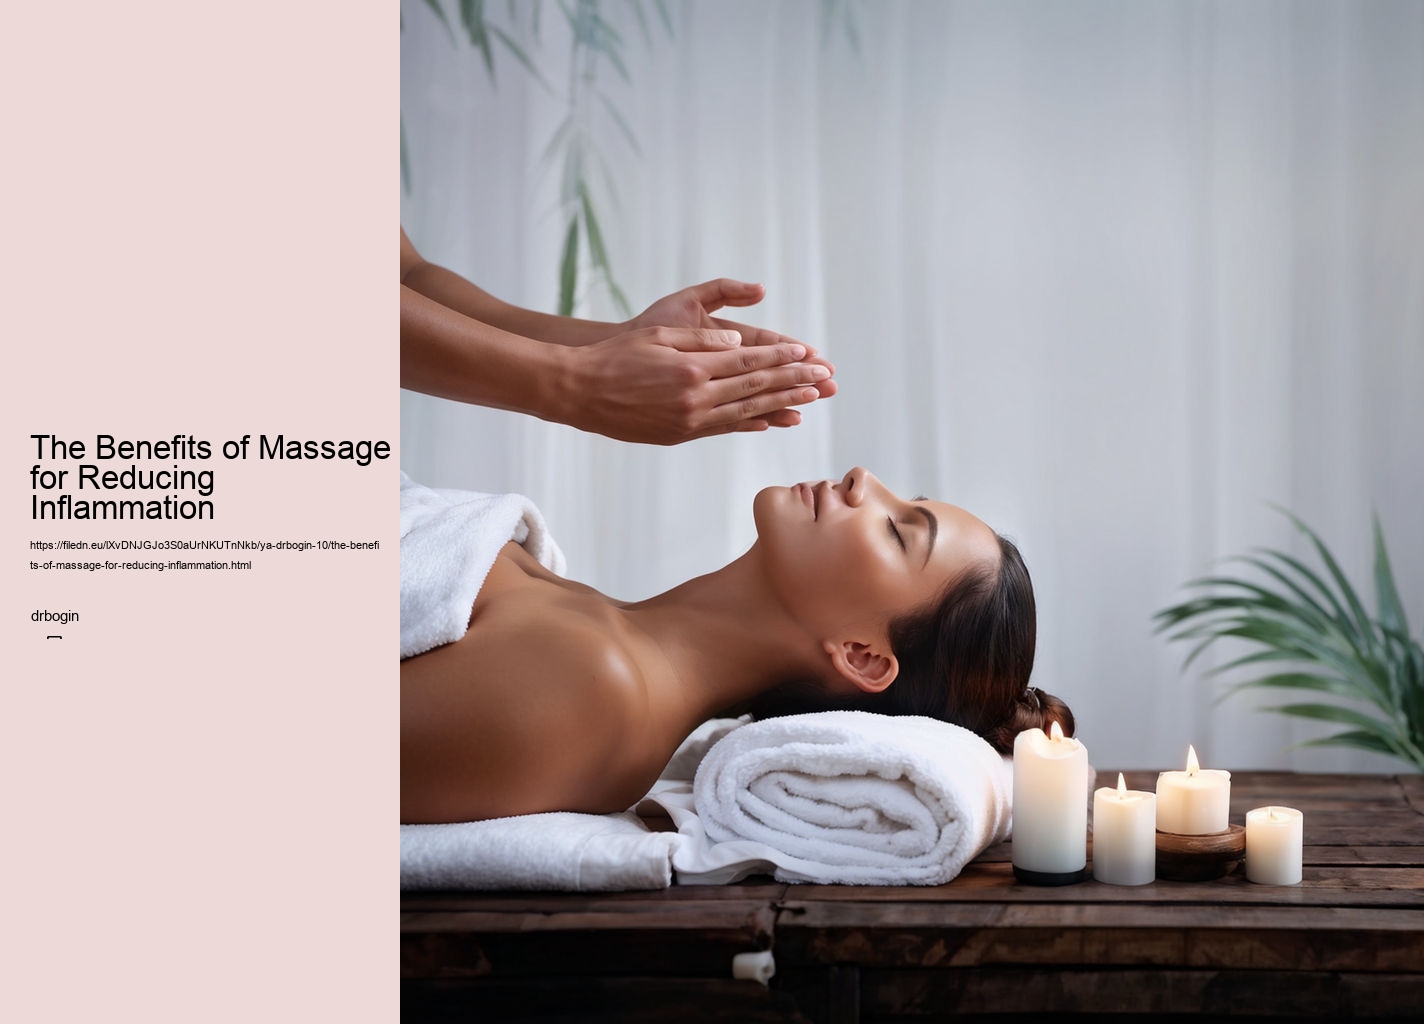 The Benefits of Massage for Reducing Inflammation